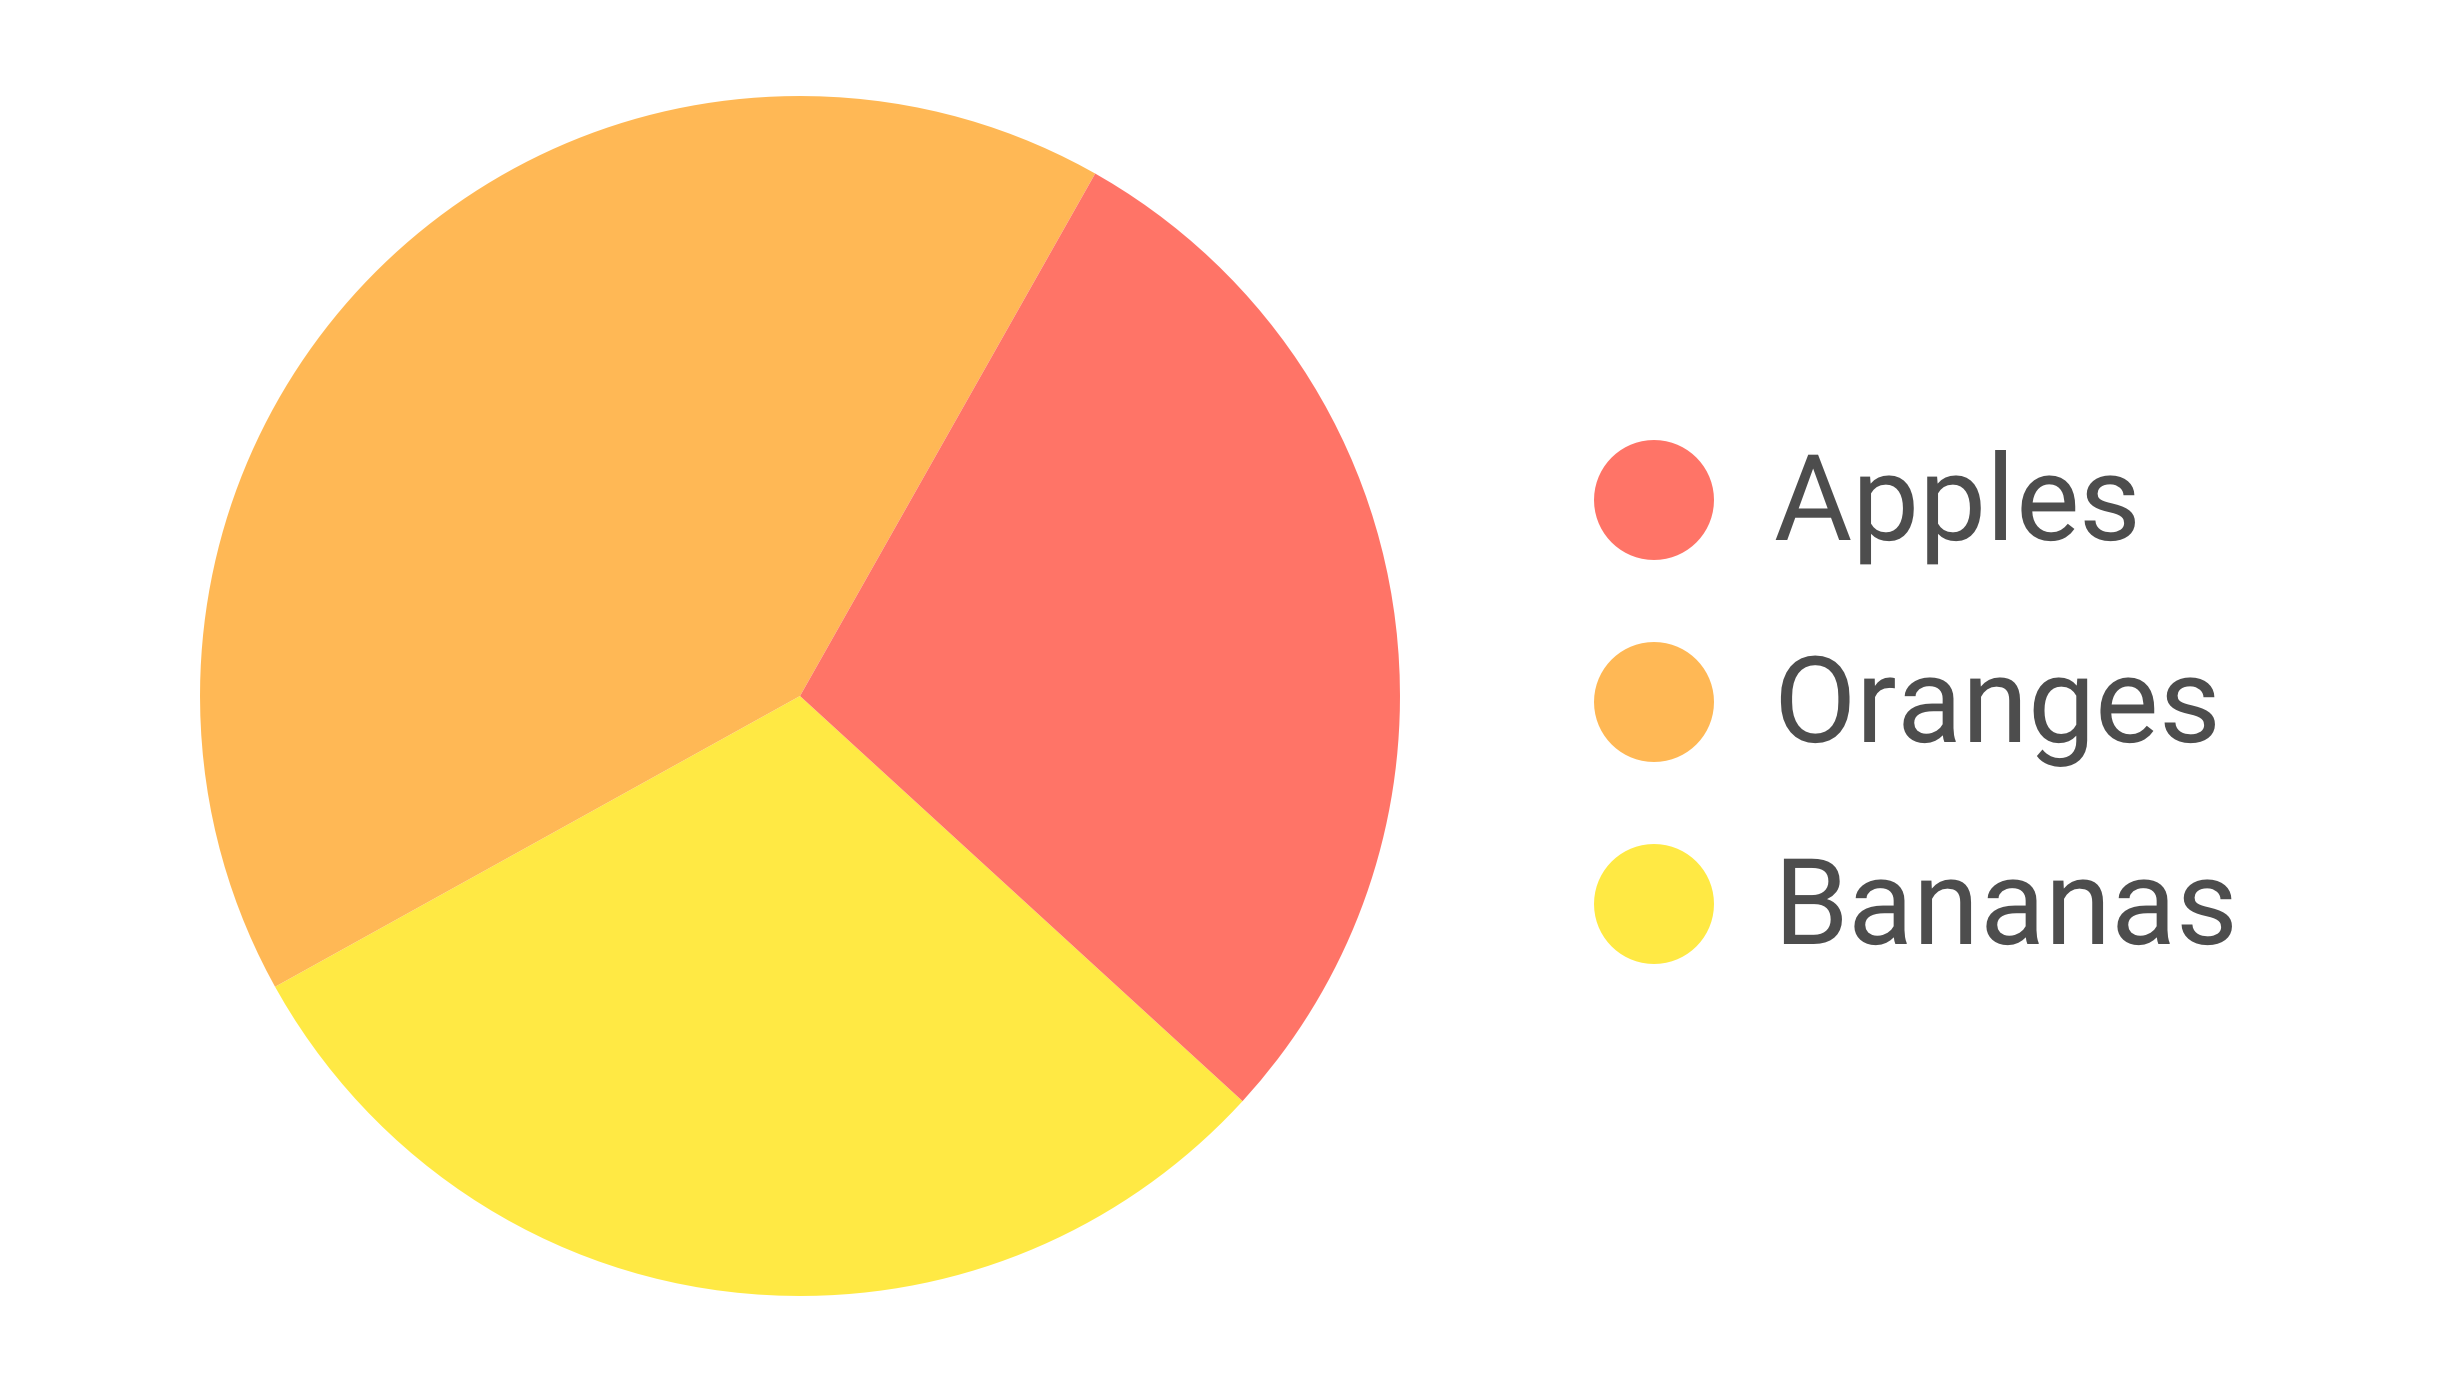 Pie chart with three colour-coded sections, labelled in a separate legend